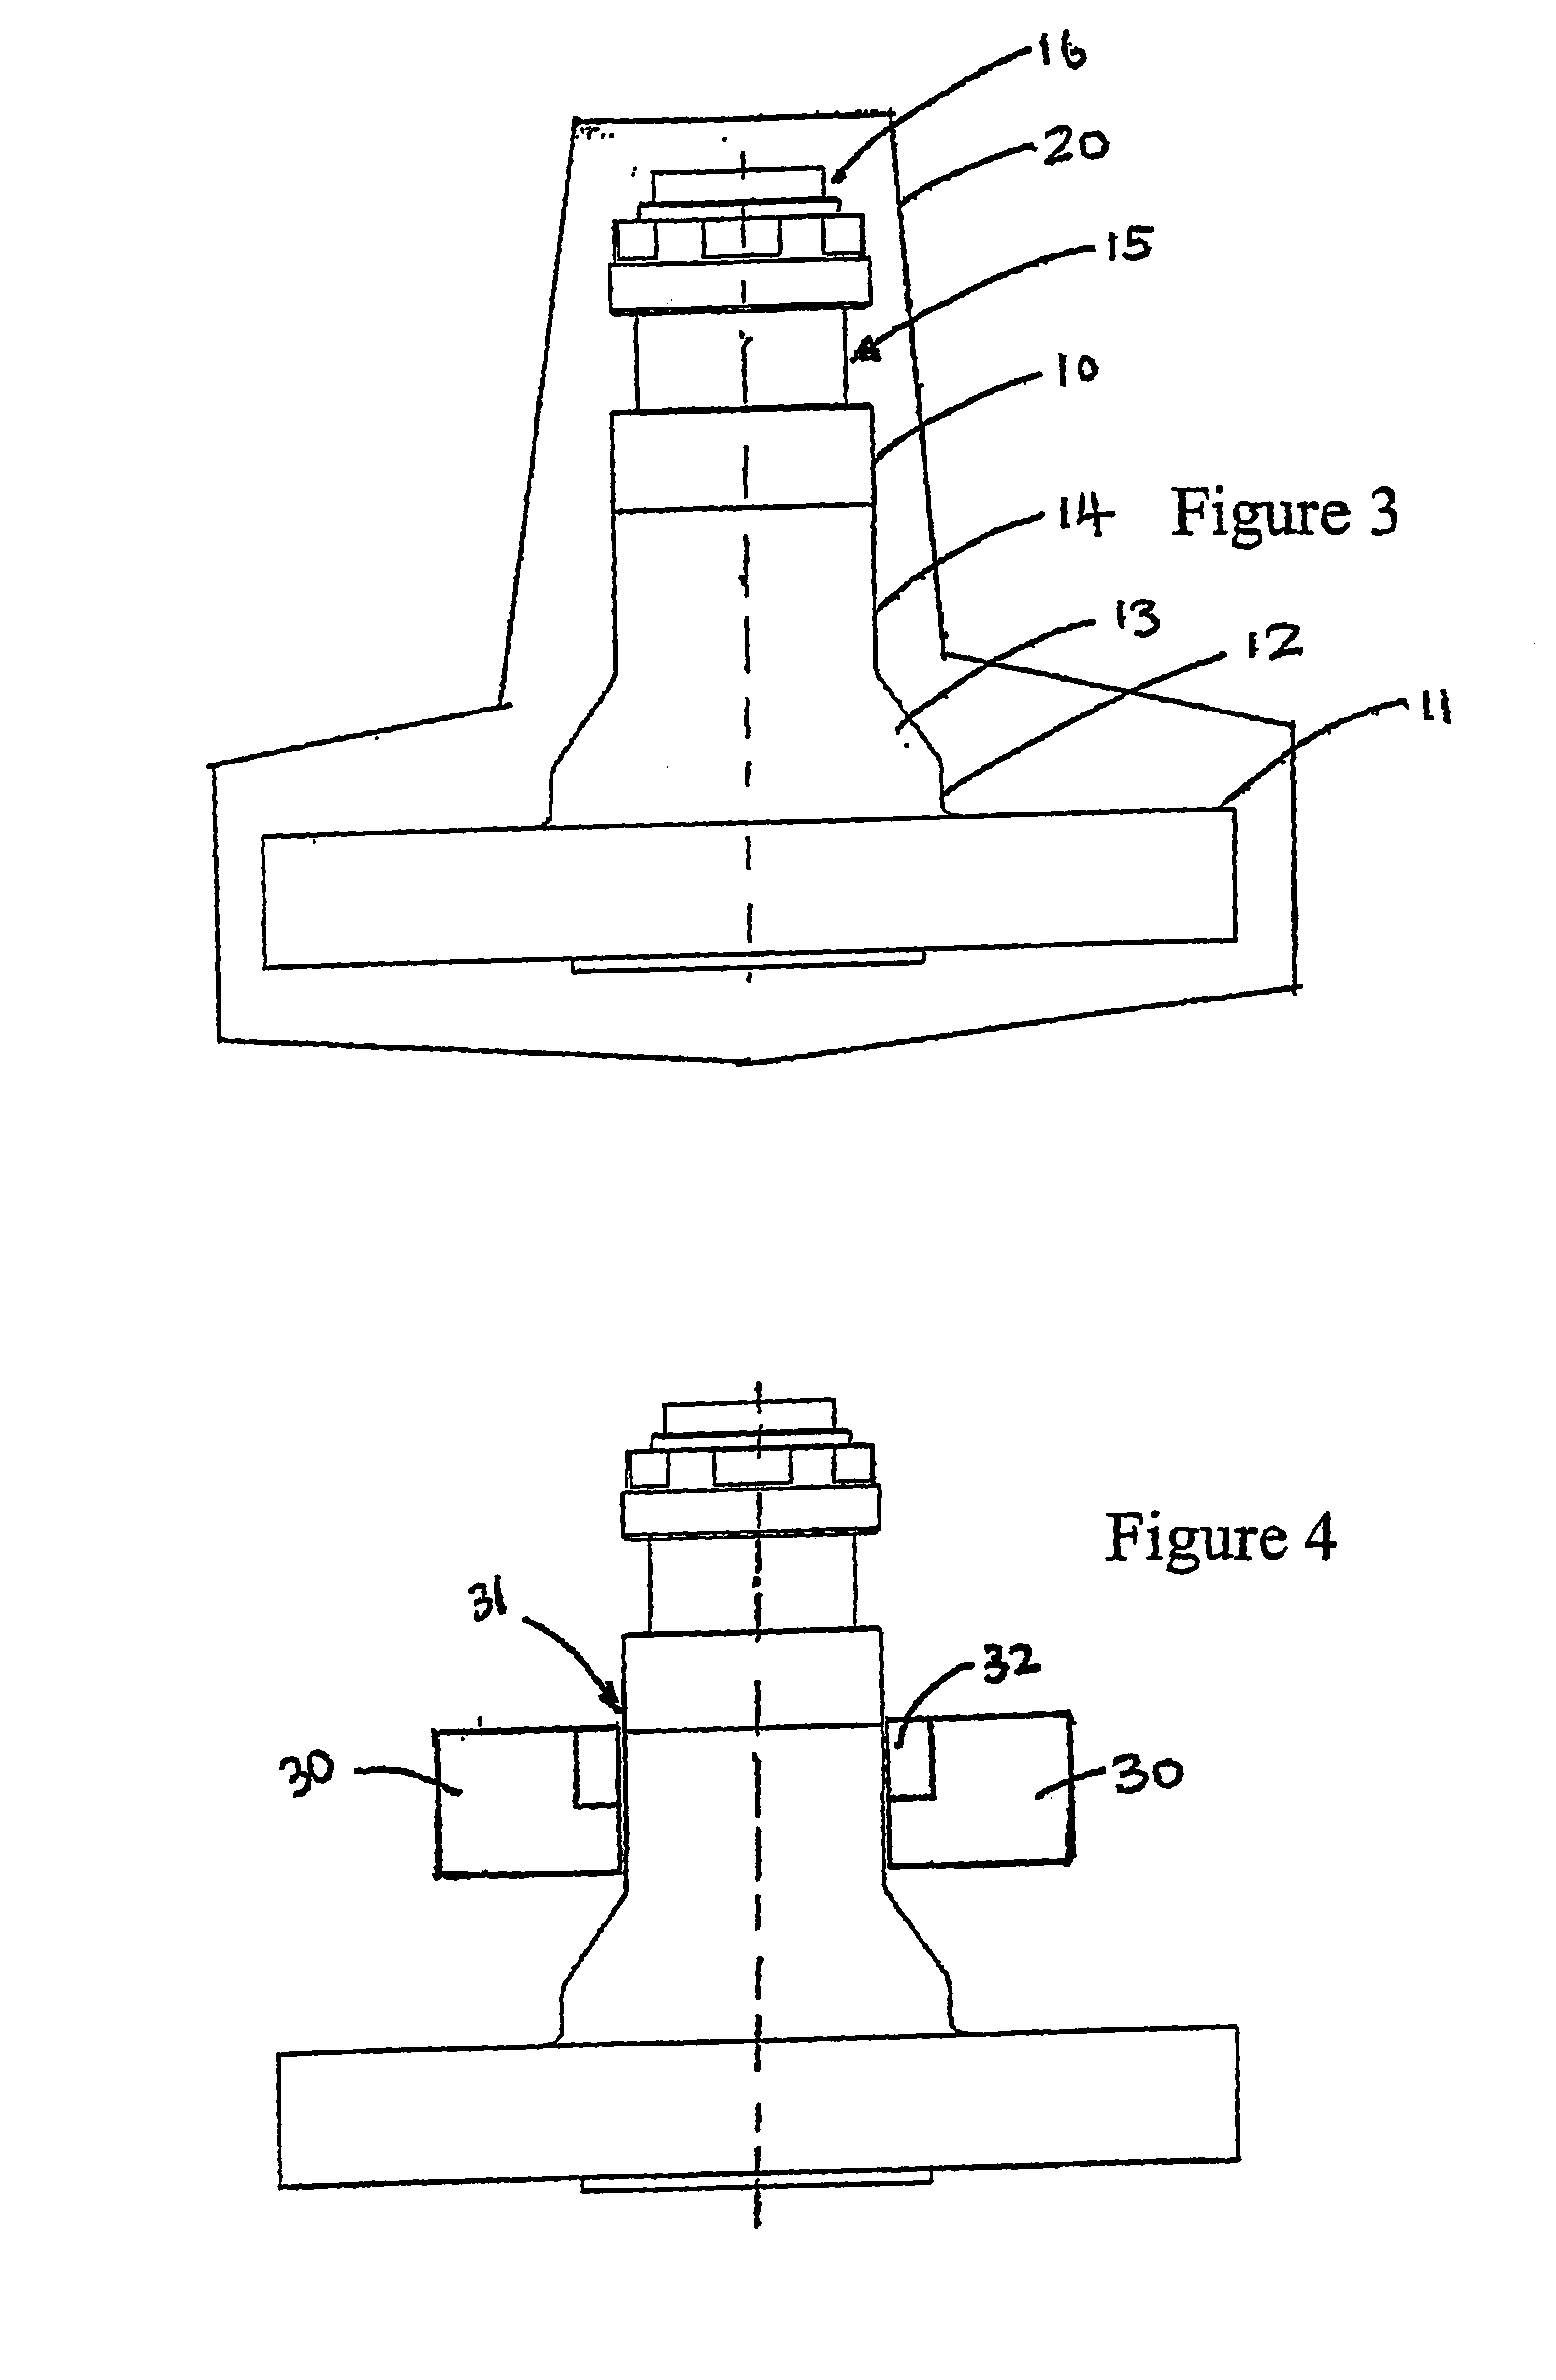 Method of providing a flanged connection